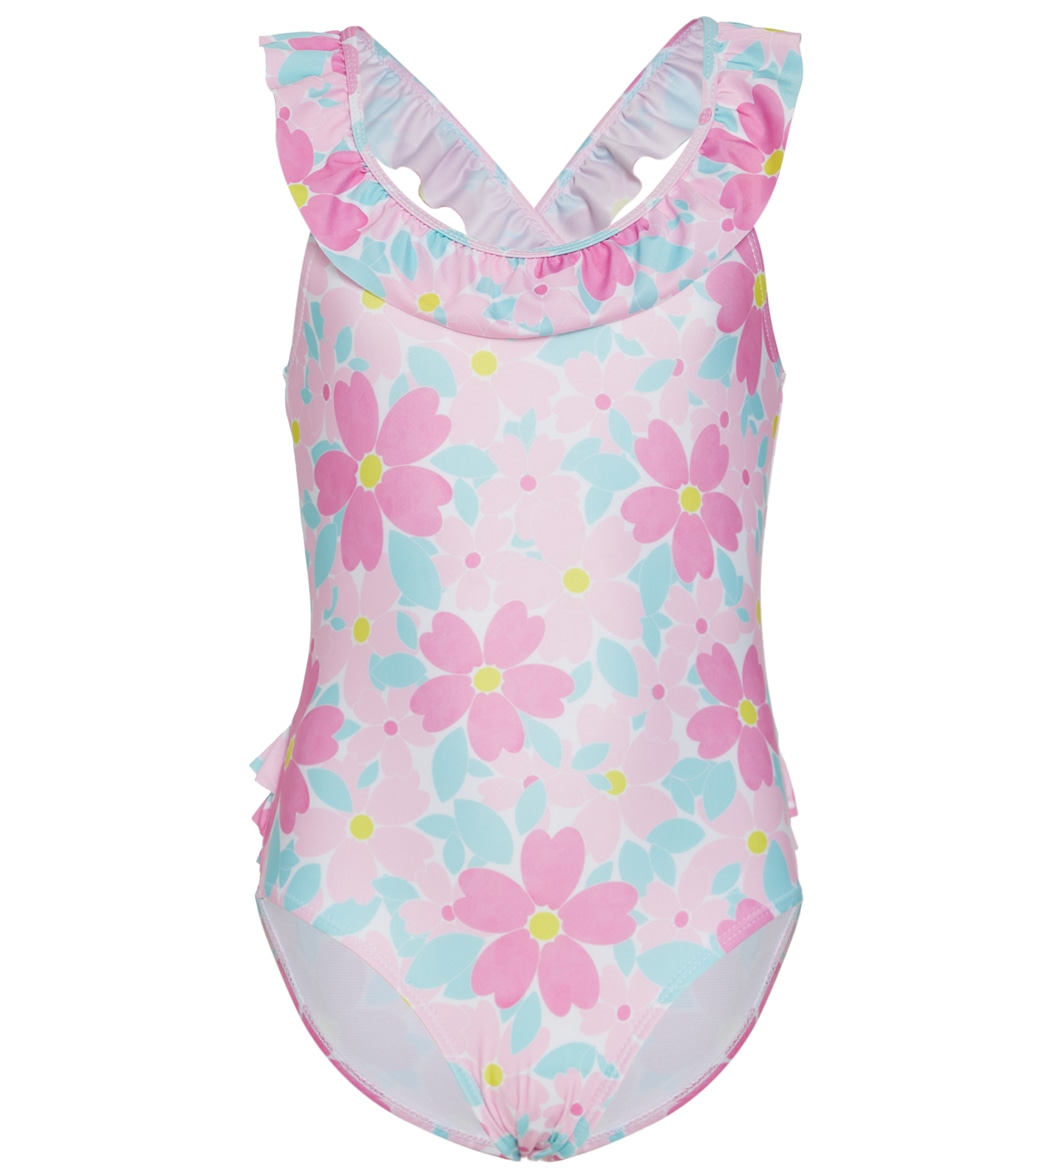 Flap Happy Girls' Painted Flowers Mindy Upf 50+ One Piece Swimsuit Baby Toddler - 12 Months - Swimoutlet.com